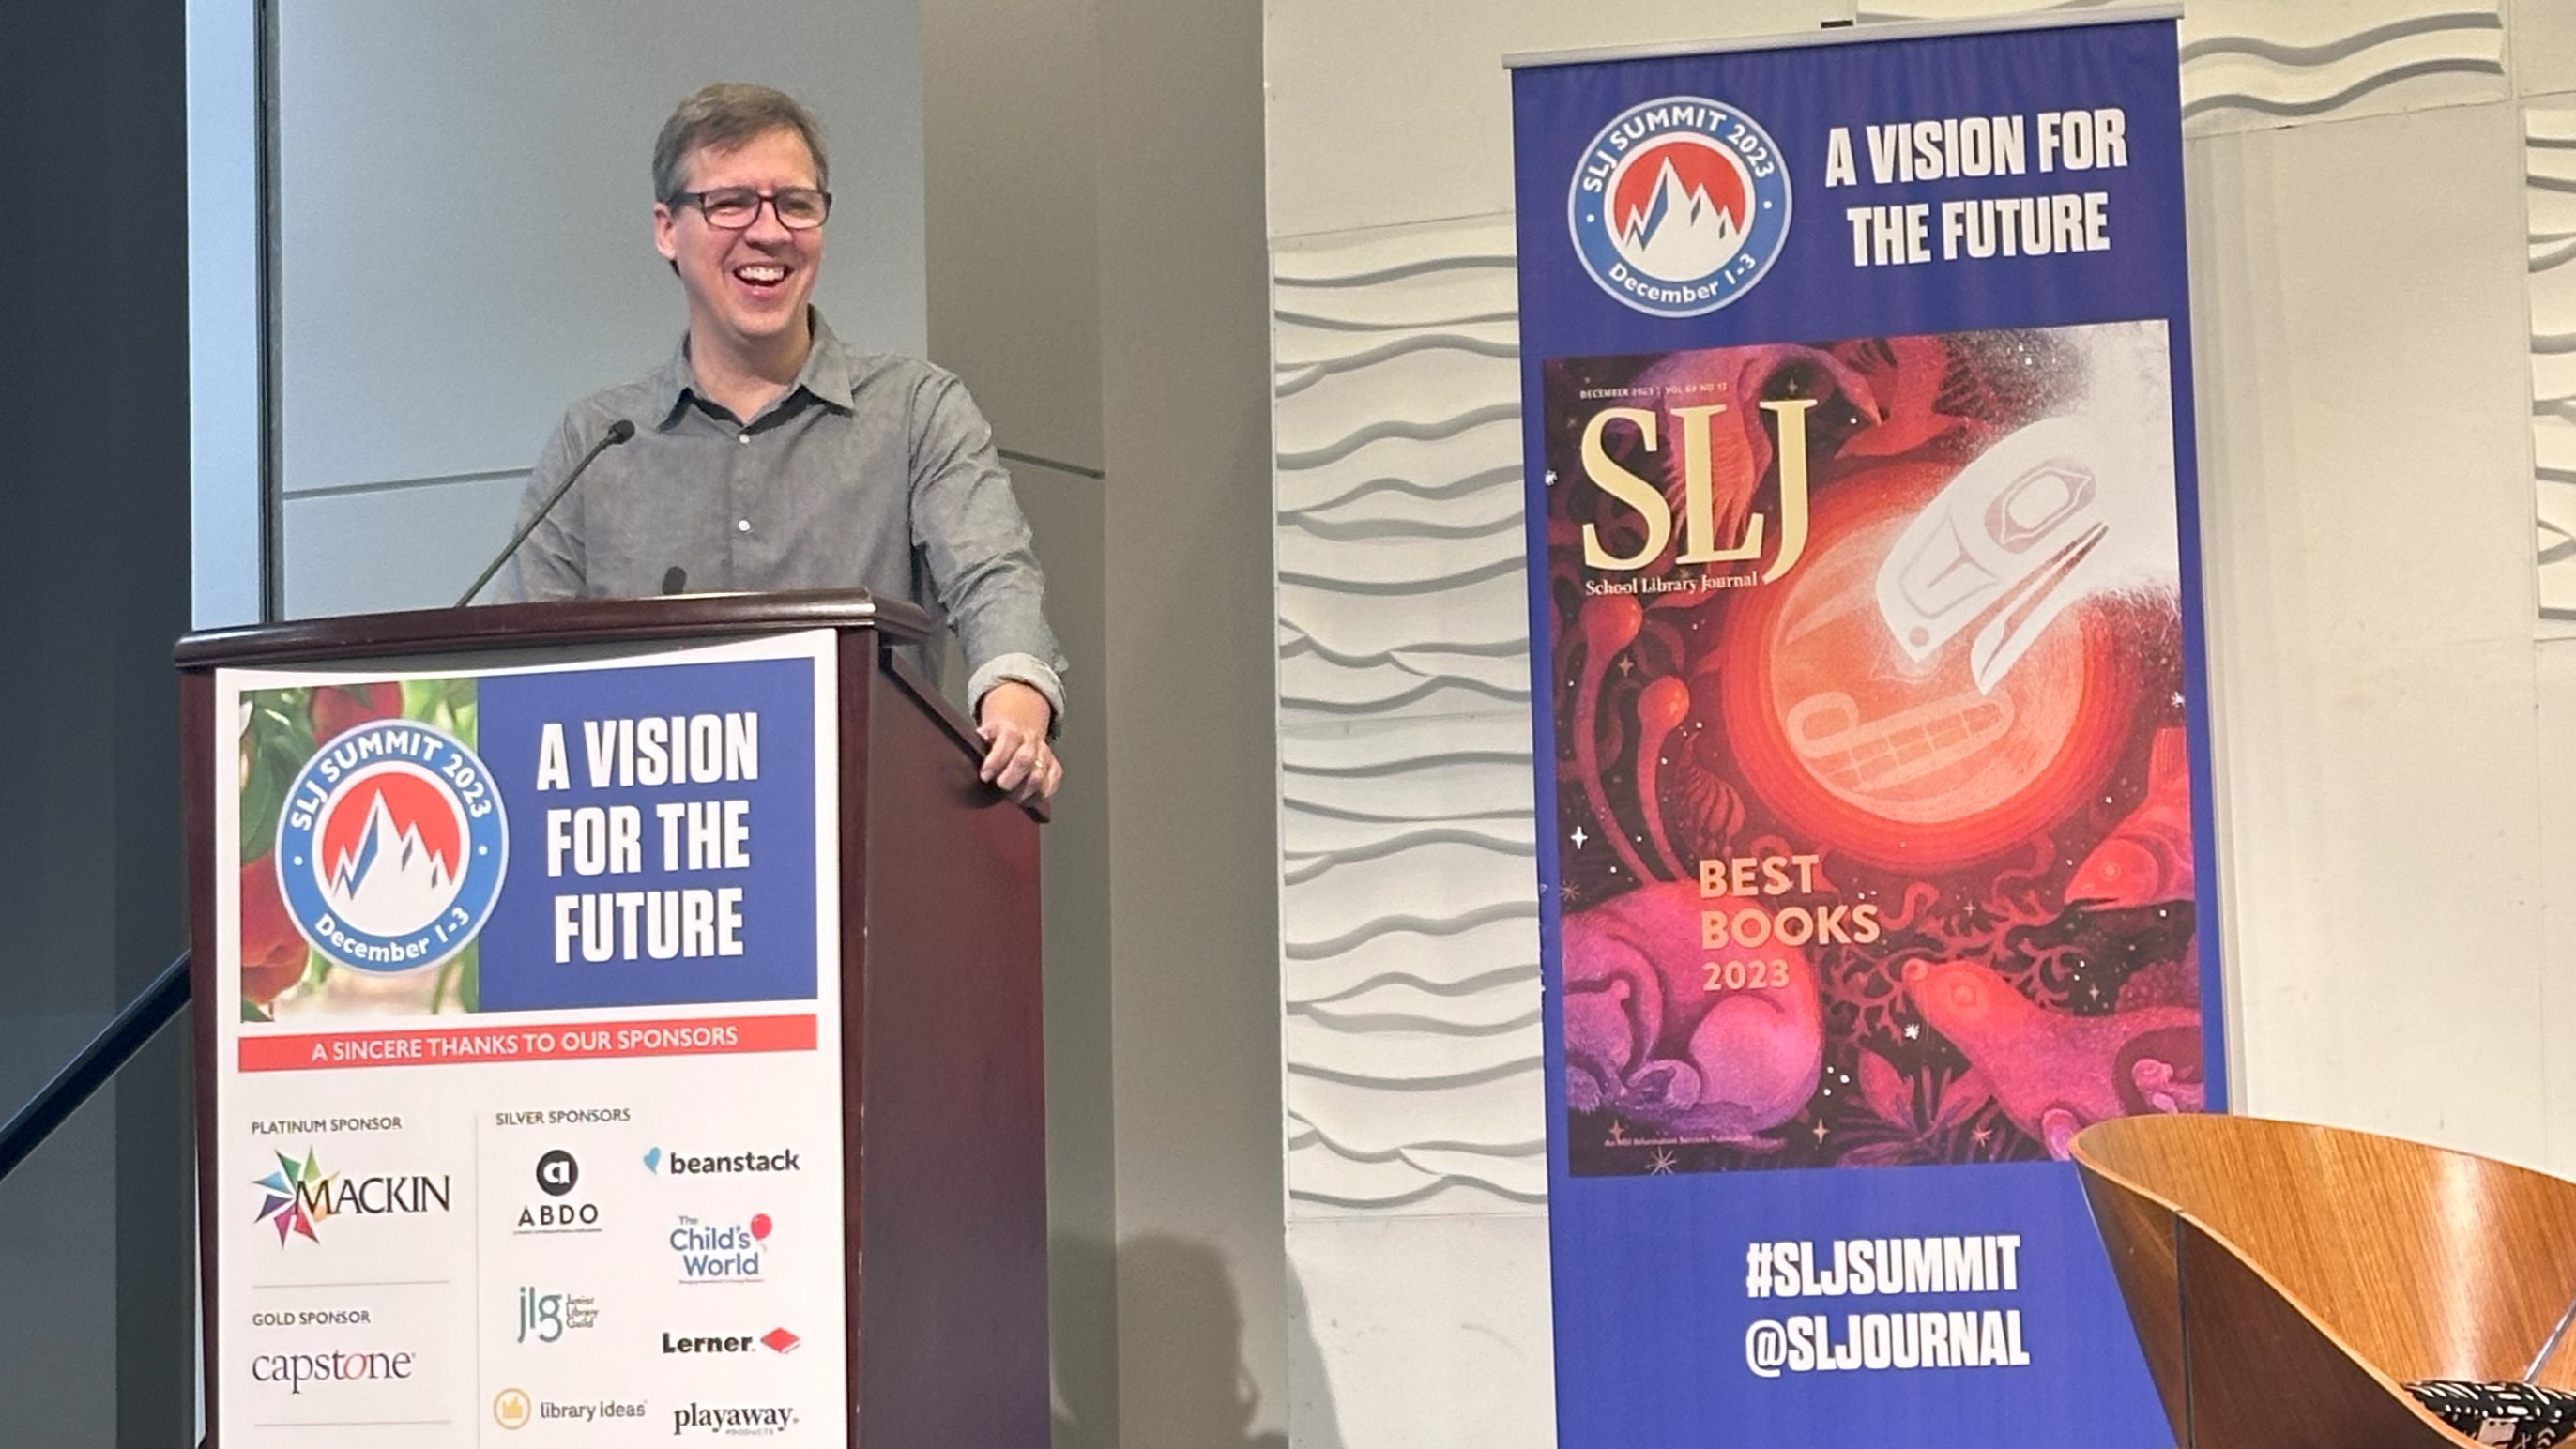 Jeff Kinney Discusses the Books That Shaped His Childhood and Opened His Mind | SLJ Summit 2023